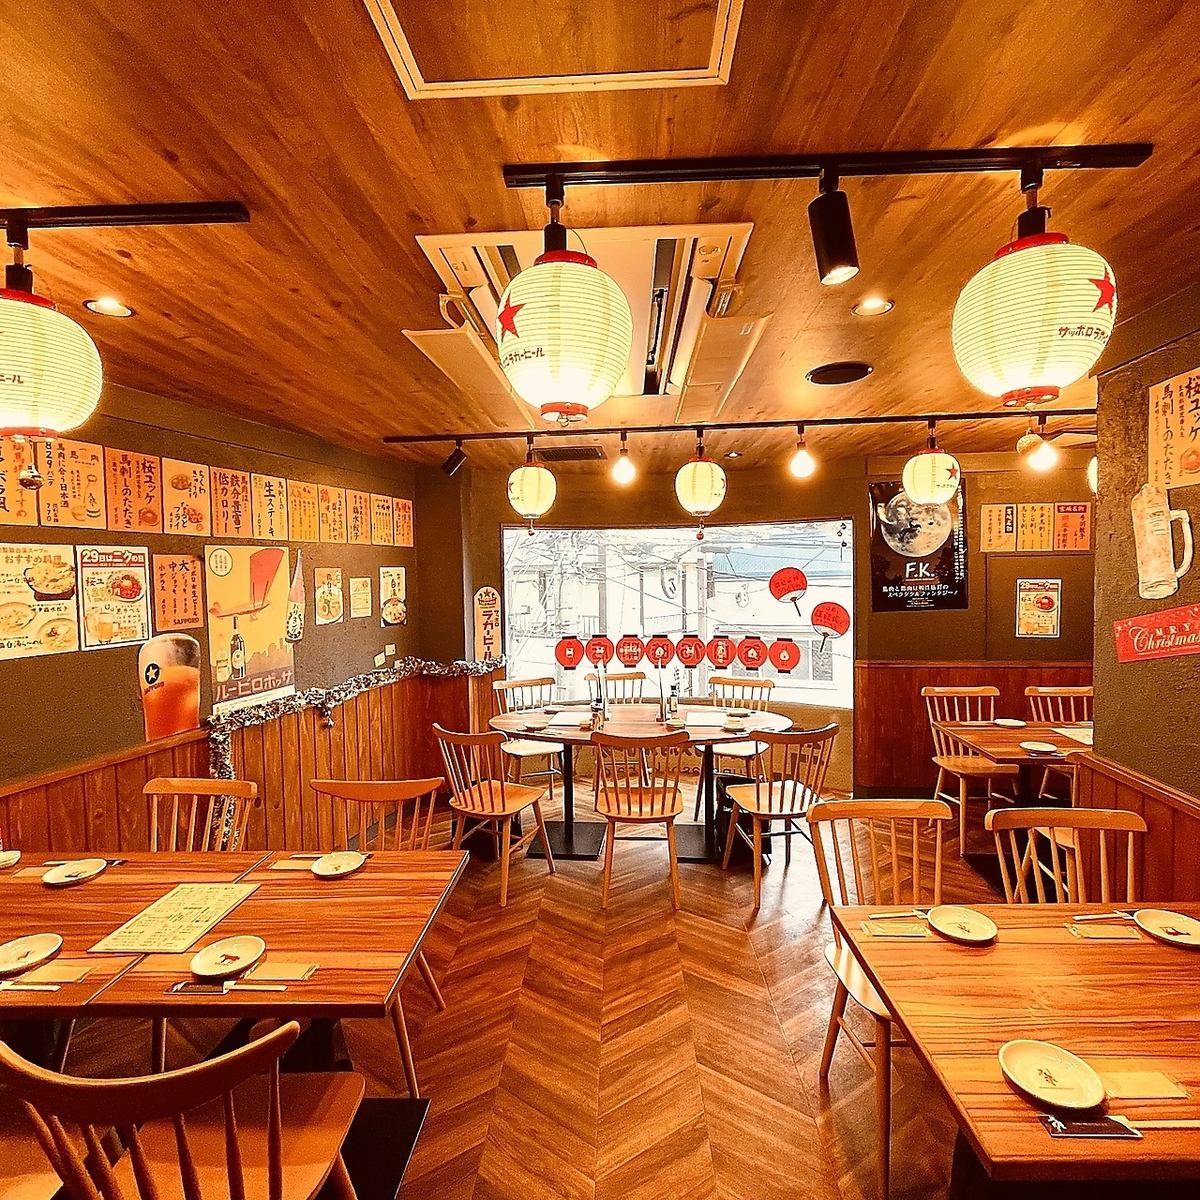 The calm space with wood grain is perfect for a casual date♪